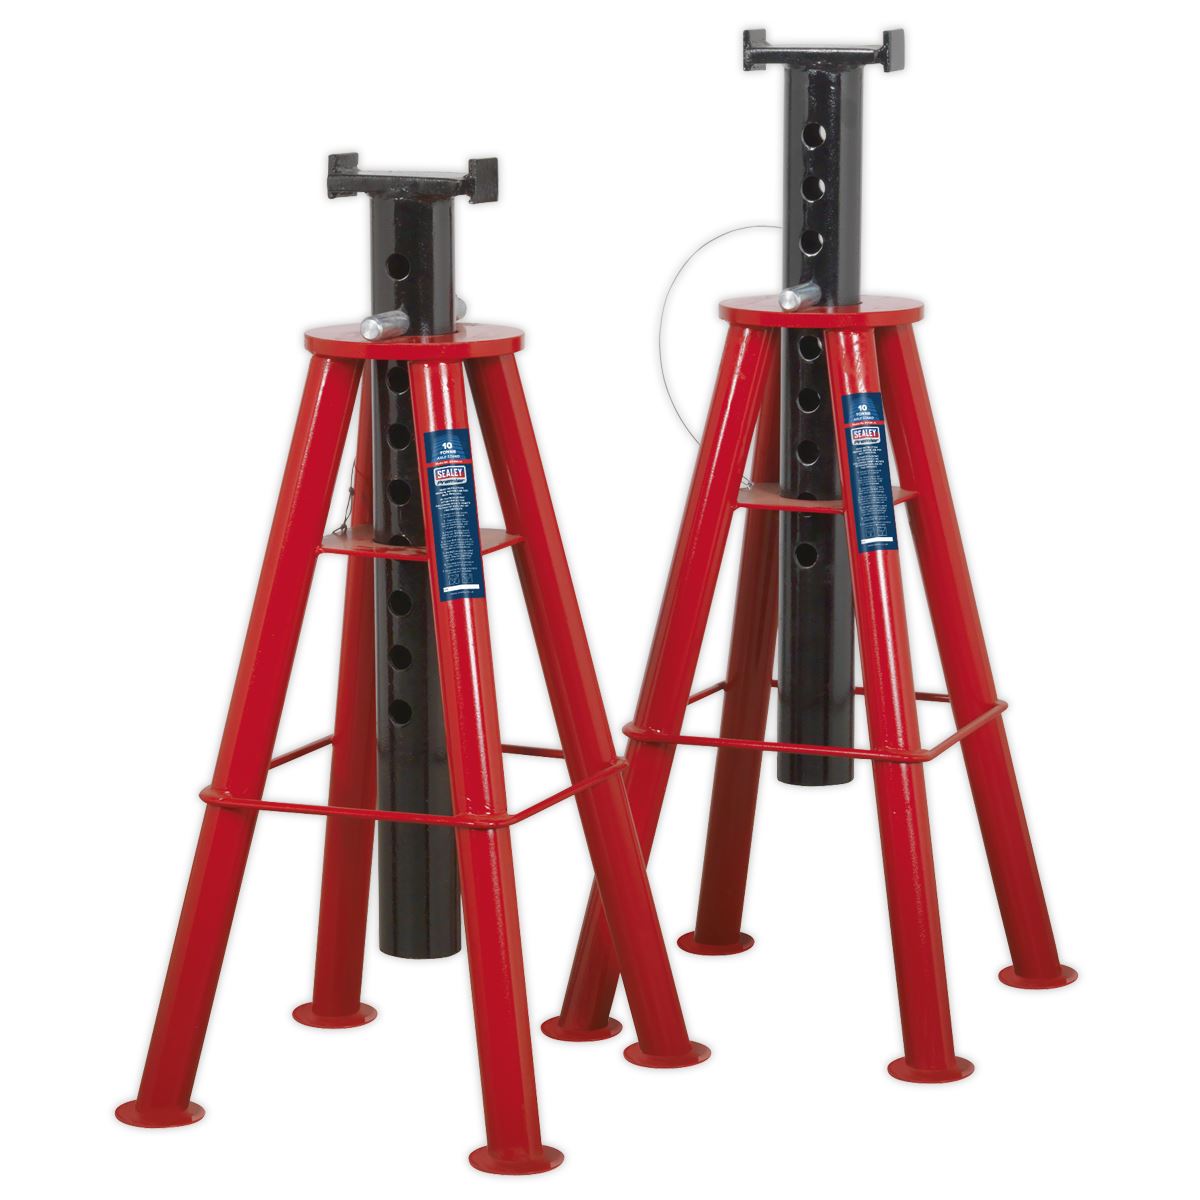 Sealey Premier Premier Axle Stands (Pair) 10 Tonne Capacity per Stand High Level